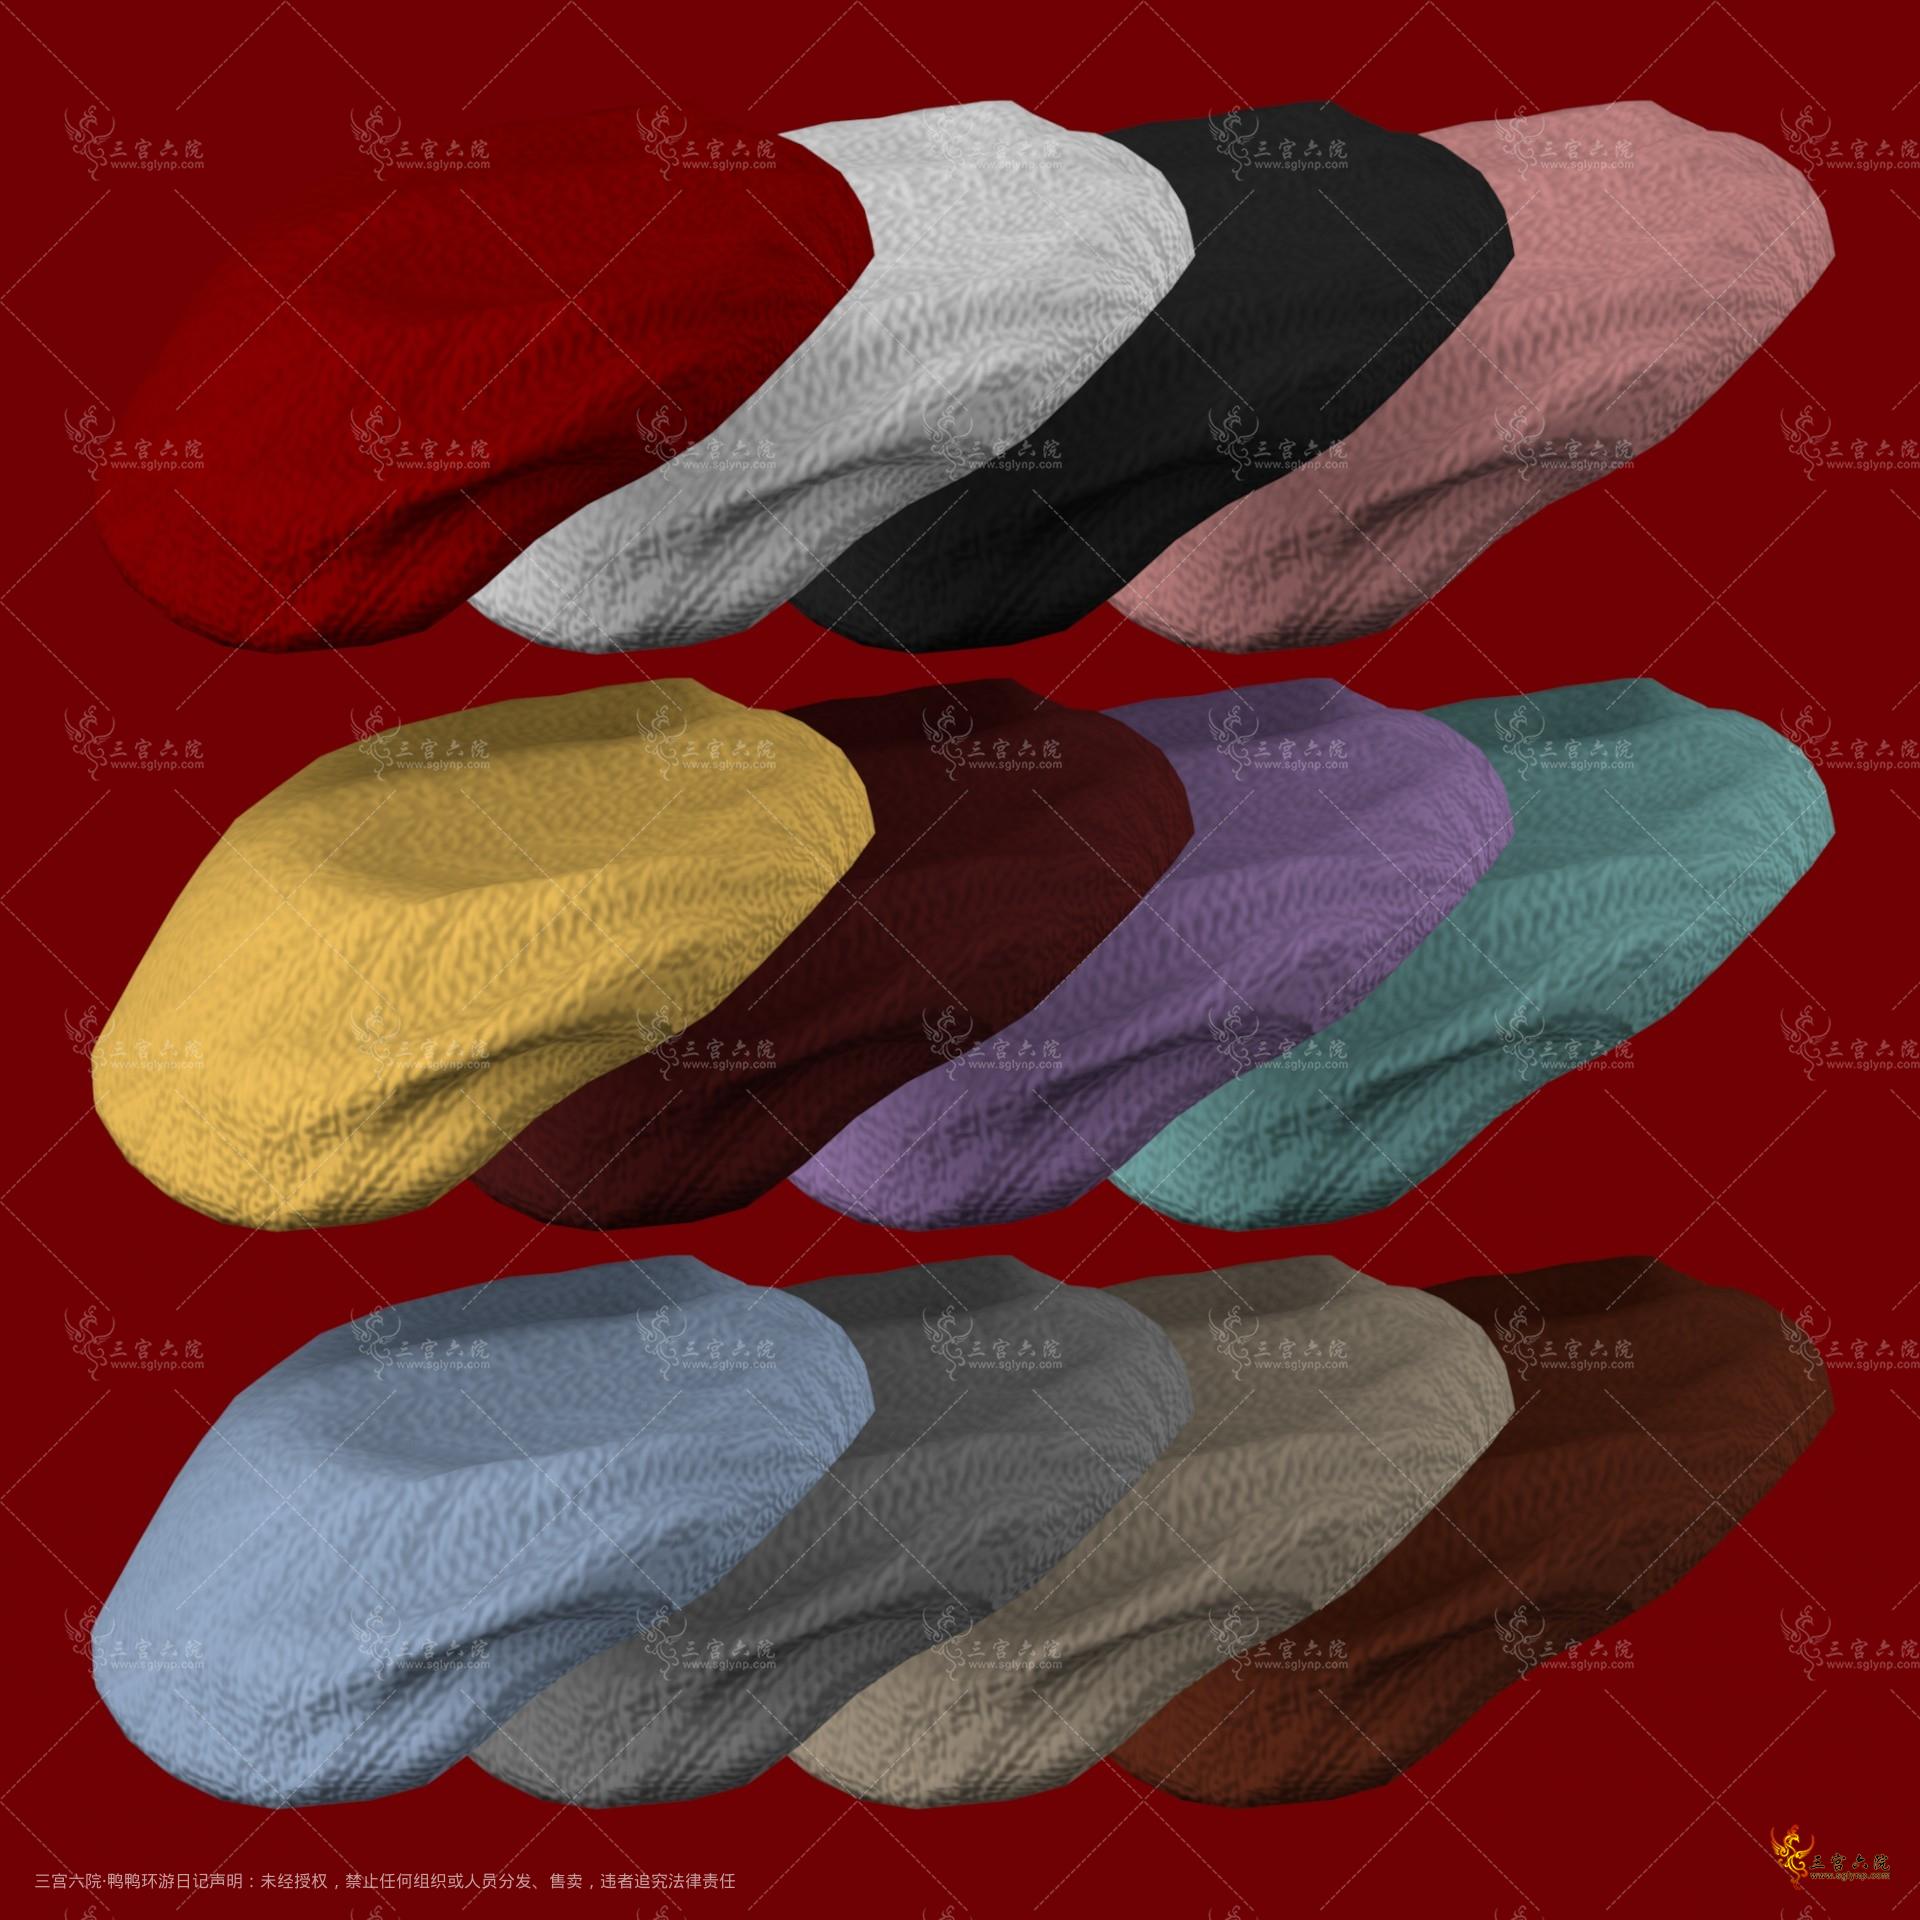 knittedwoolberet_swatches.png